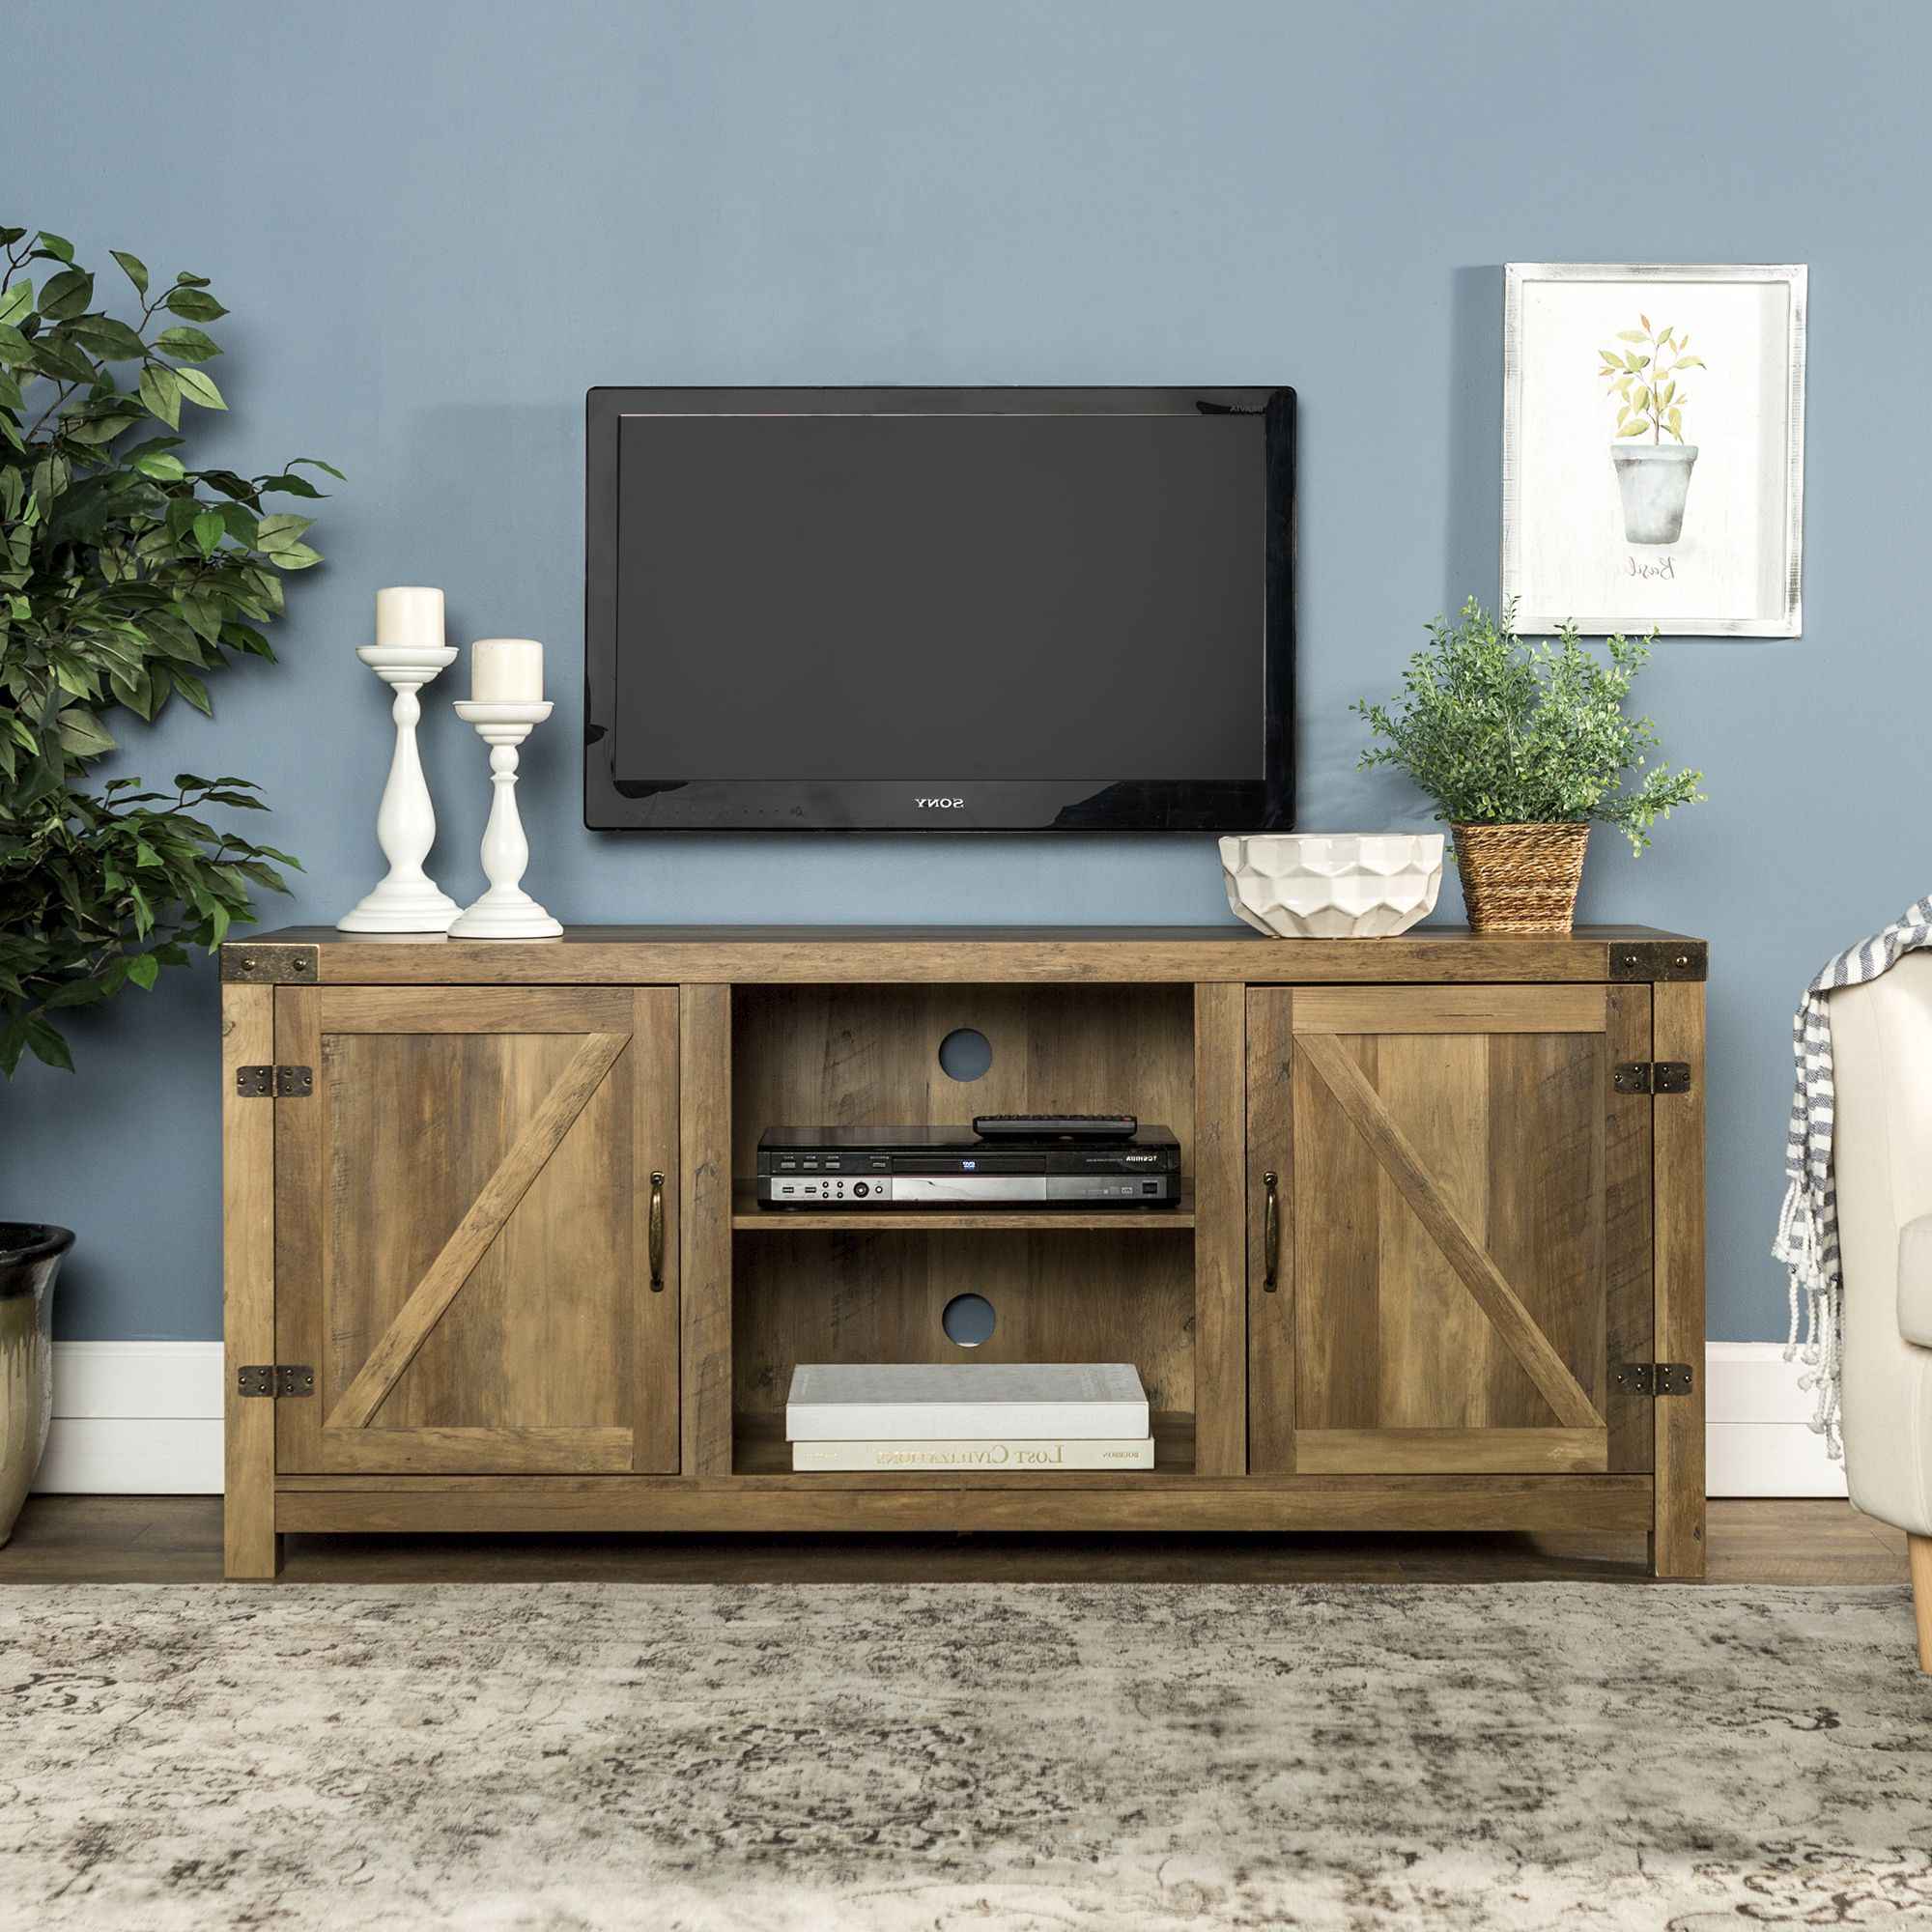 Manor Park Farmhouse Tv Stand For Tvs Up To 65", Reclaimed Intended For Trendy Bloomfield Tv Stands For Tvs Up To 65" (View 13 of 20)